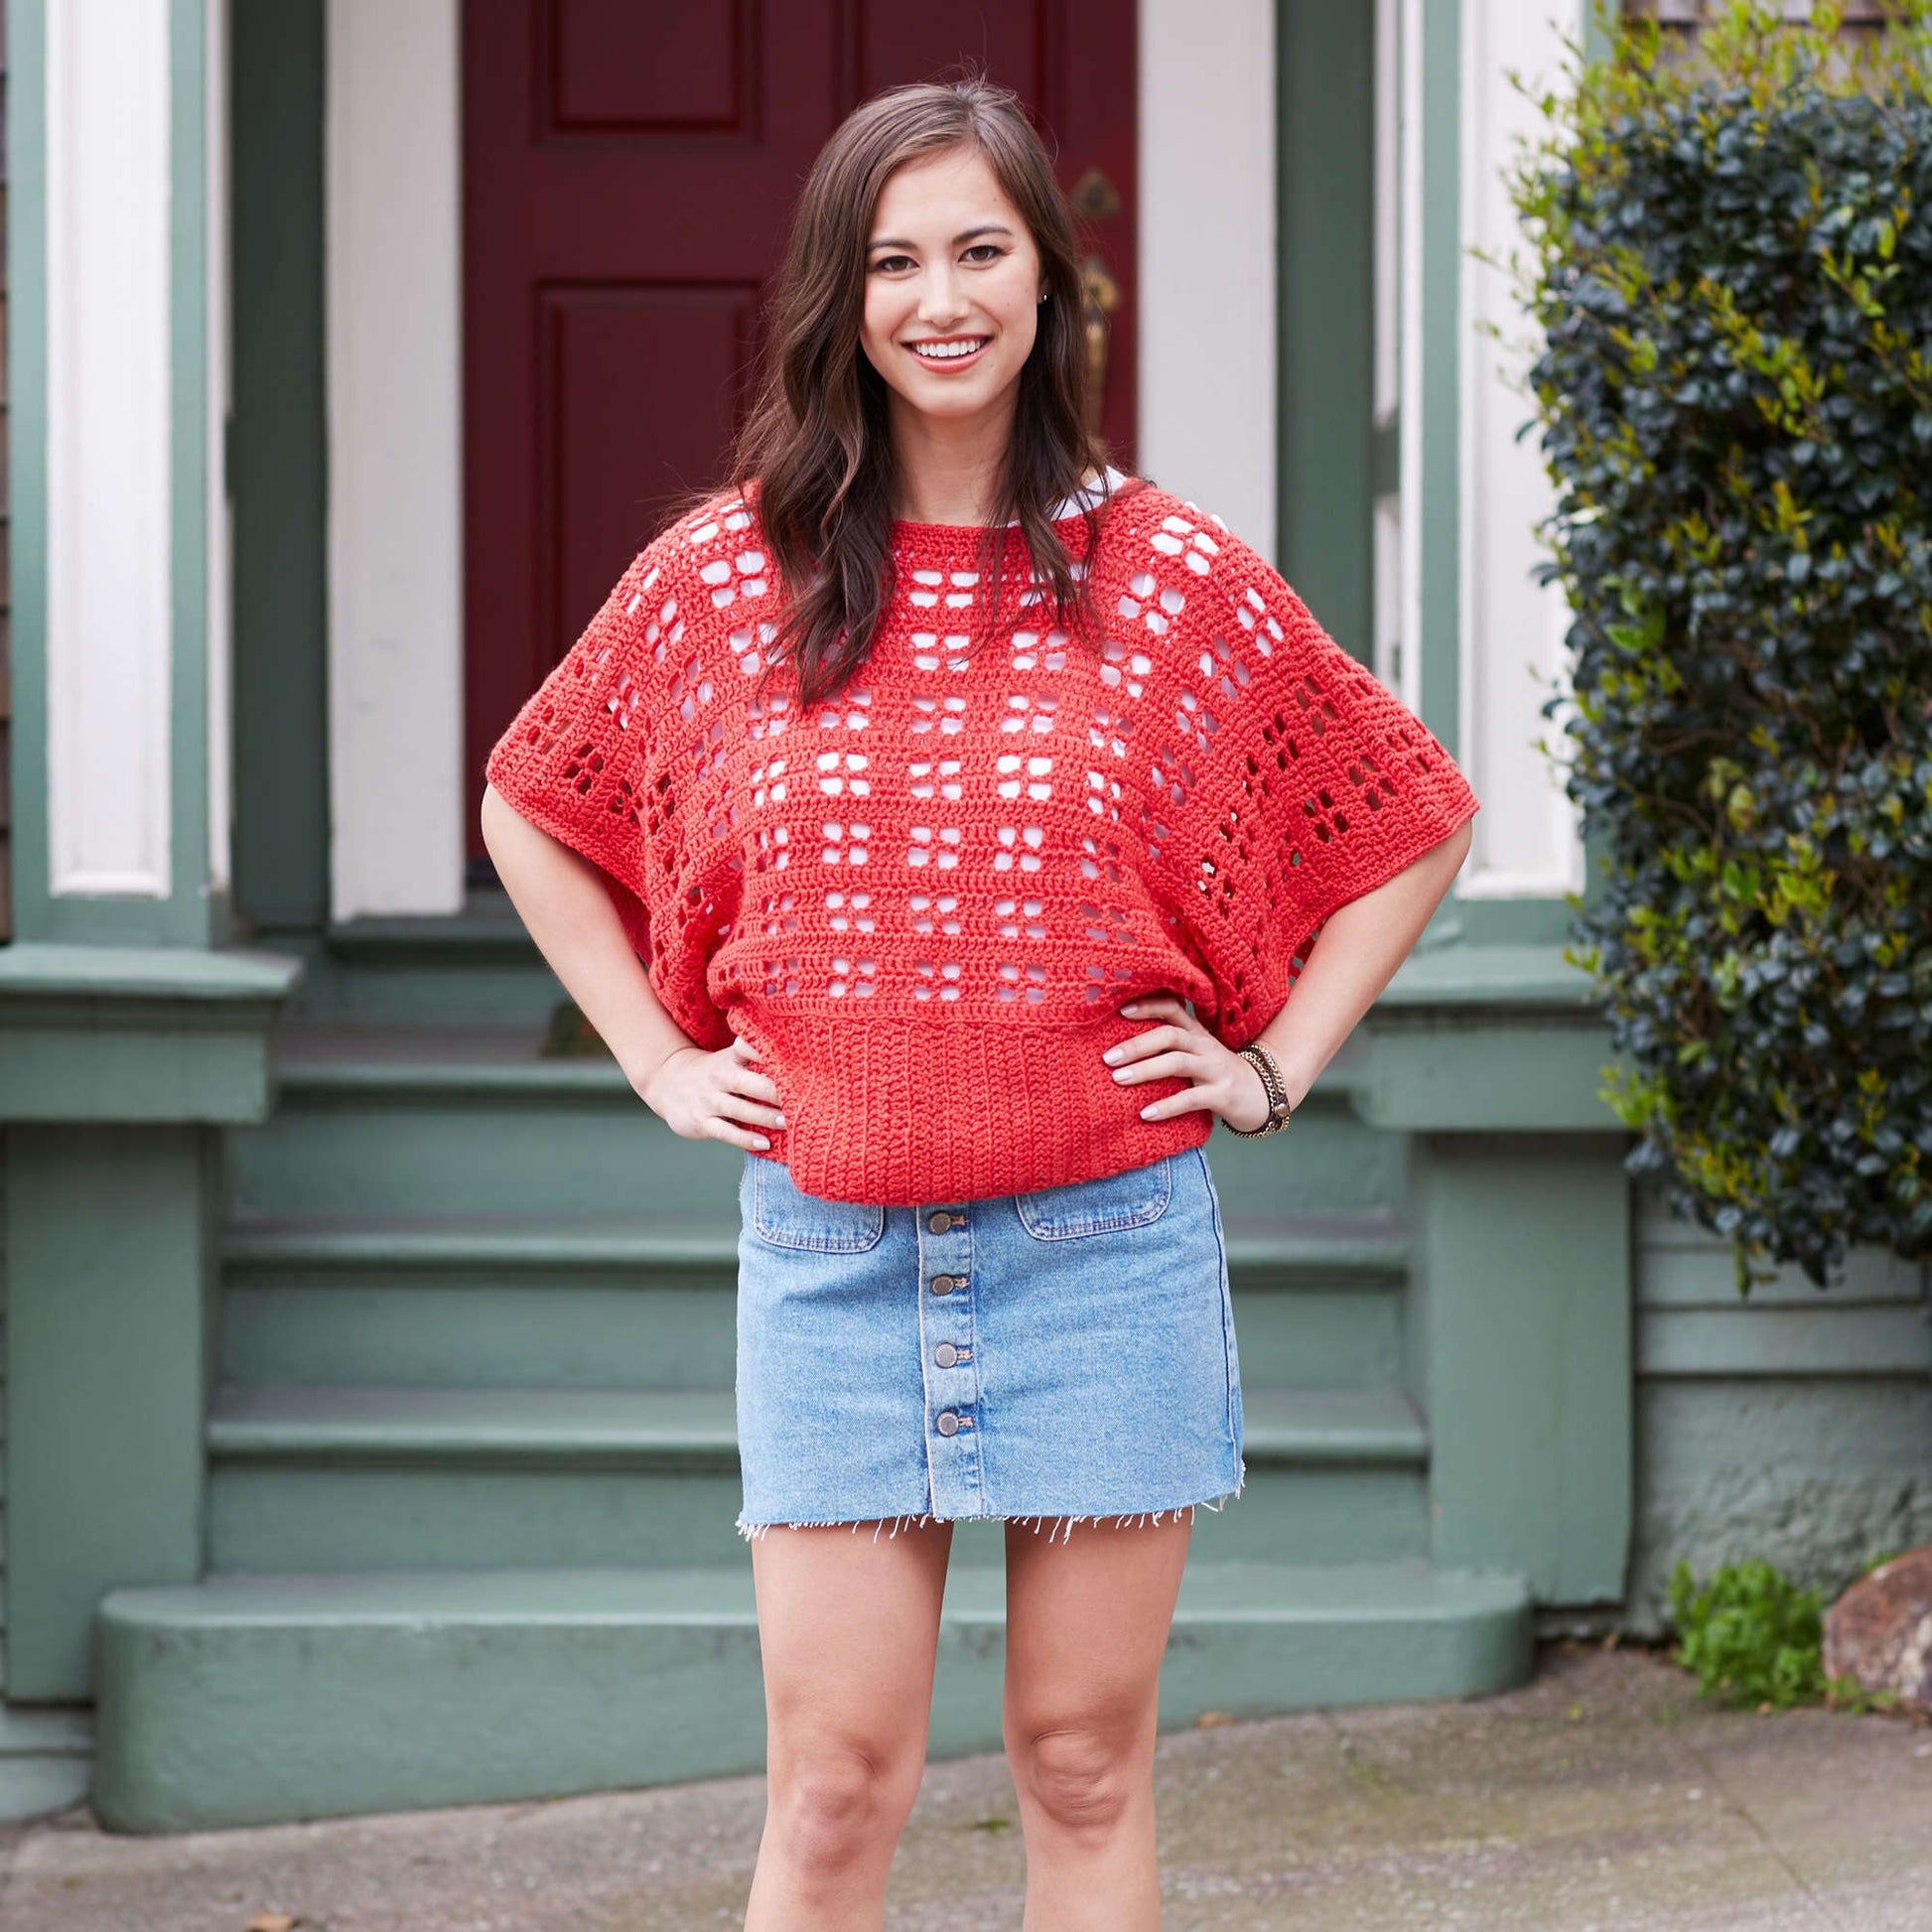 Free Red Heart Clementine Chic Sweater Pattern